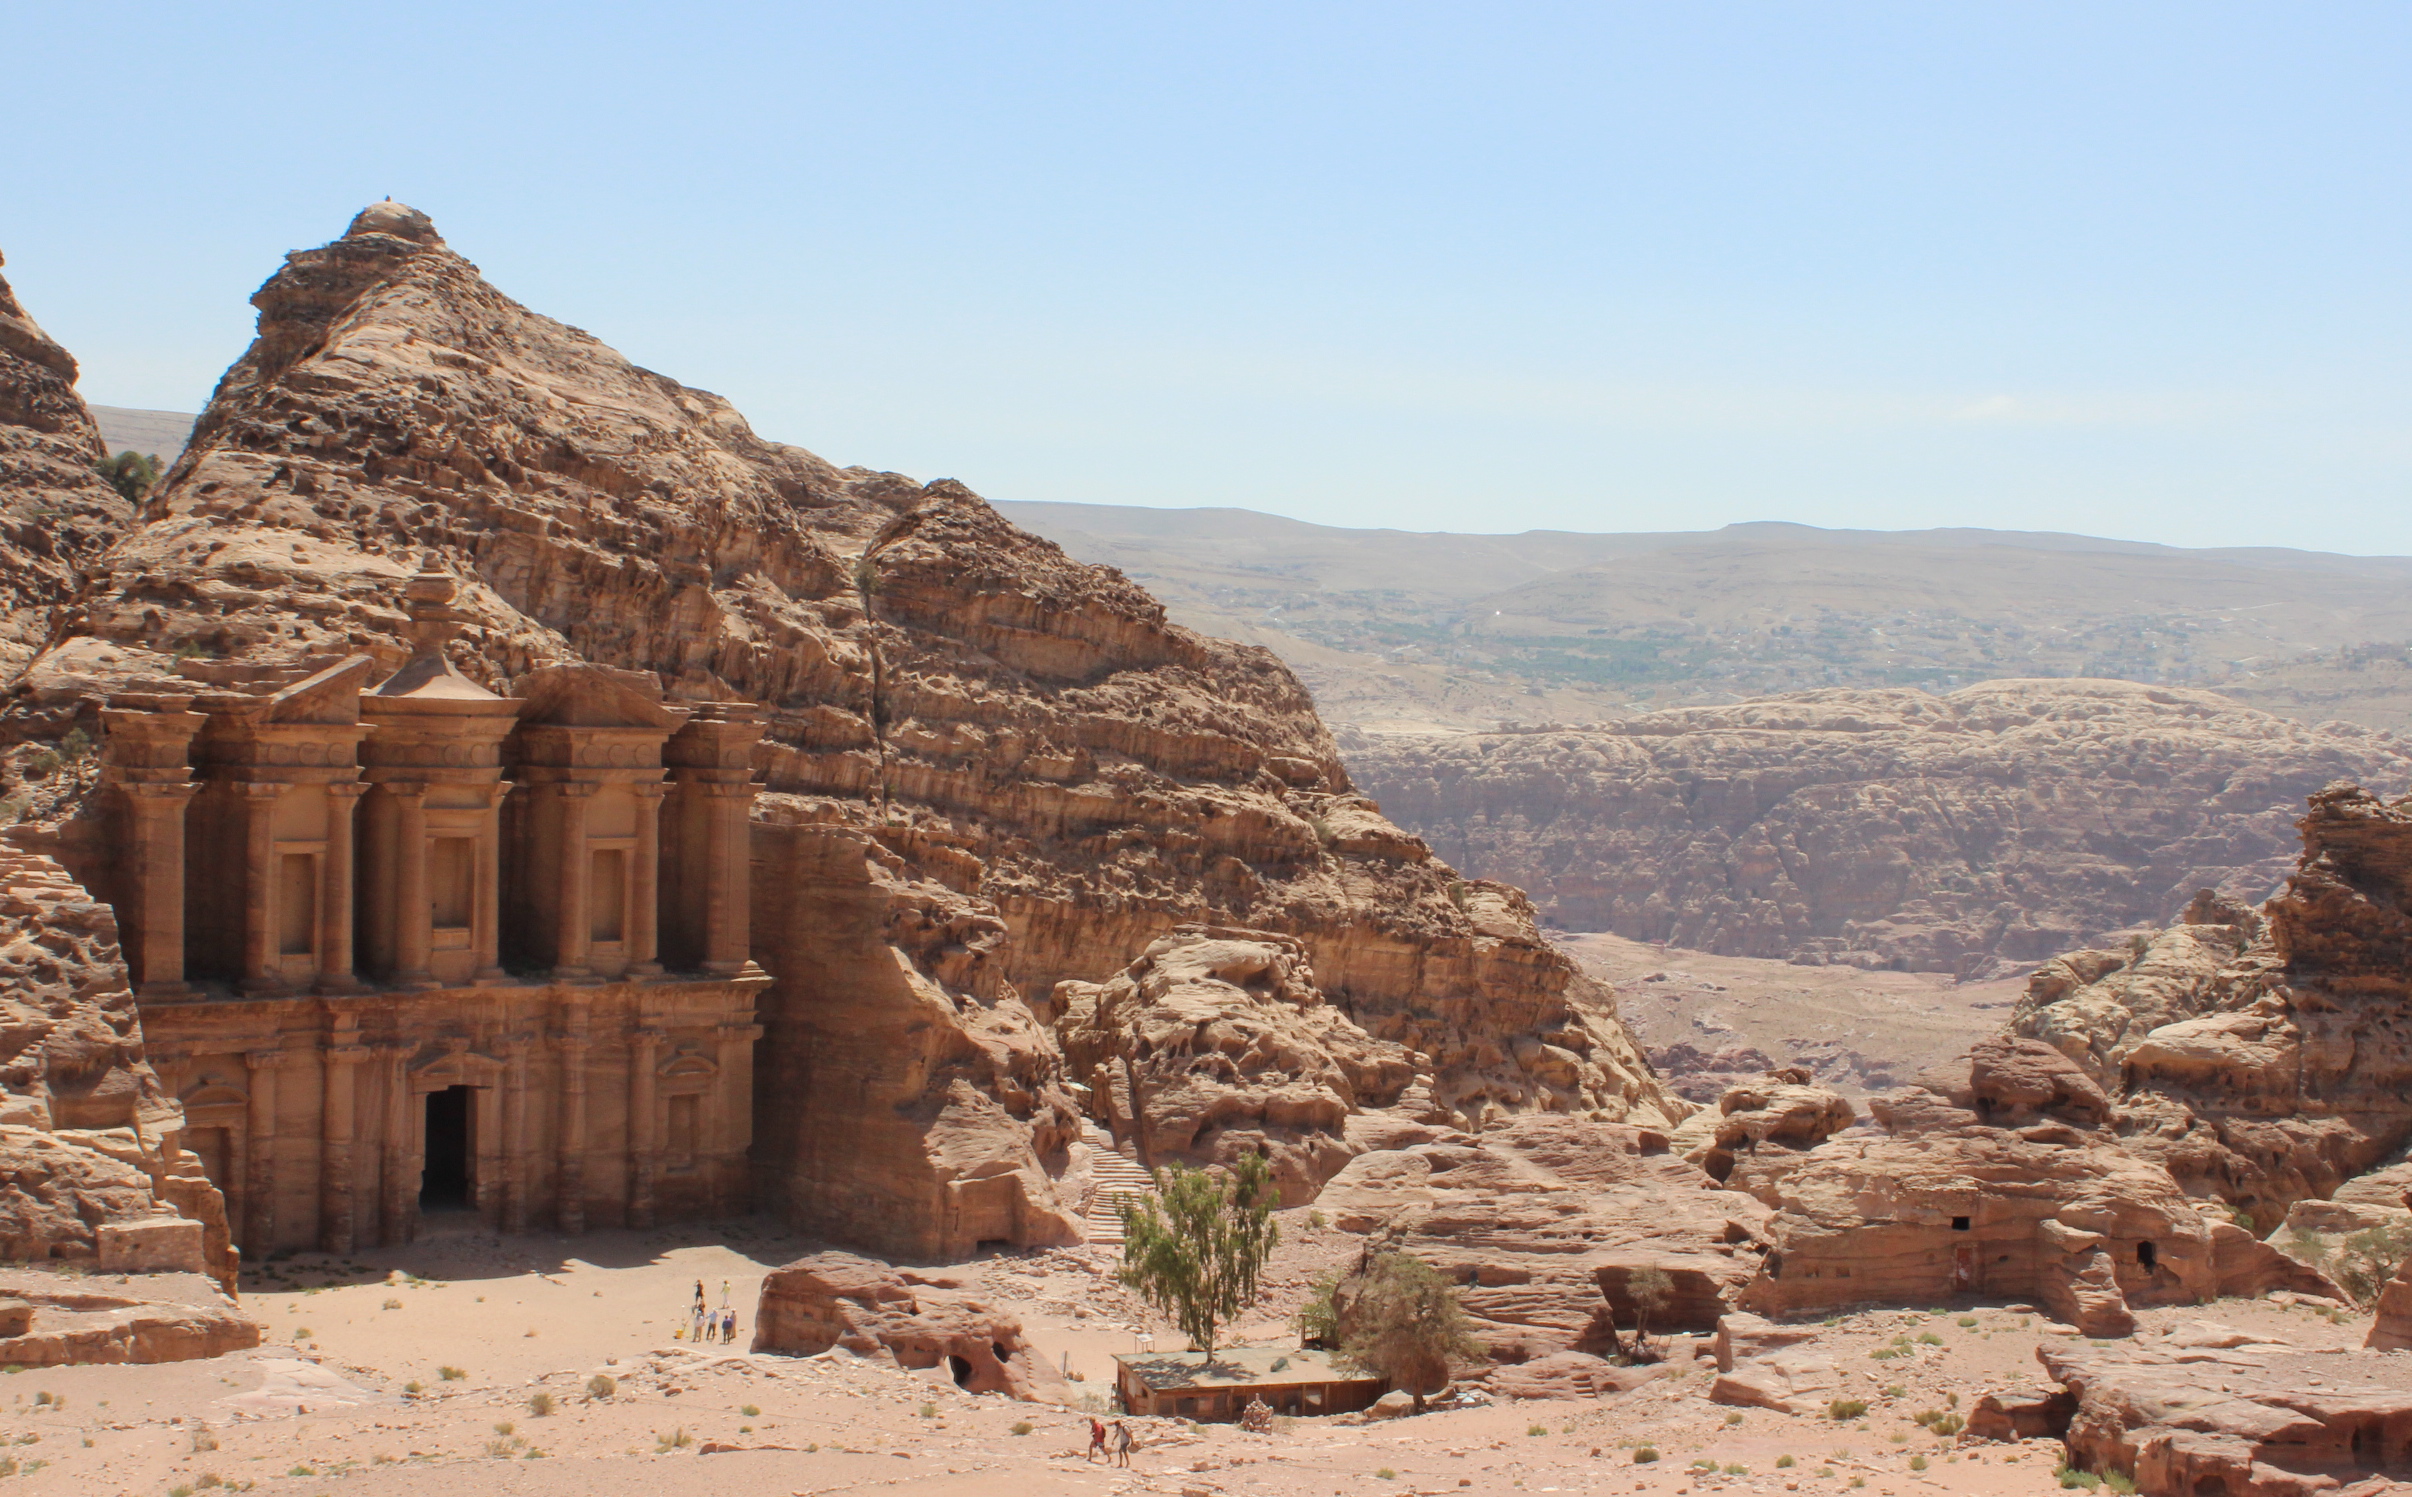 Trip of the week: a journey into Jordan’s ancient past